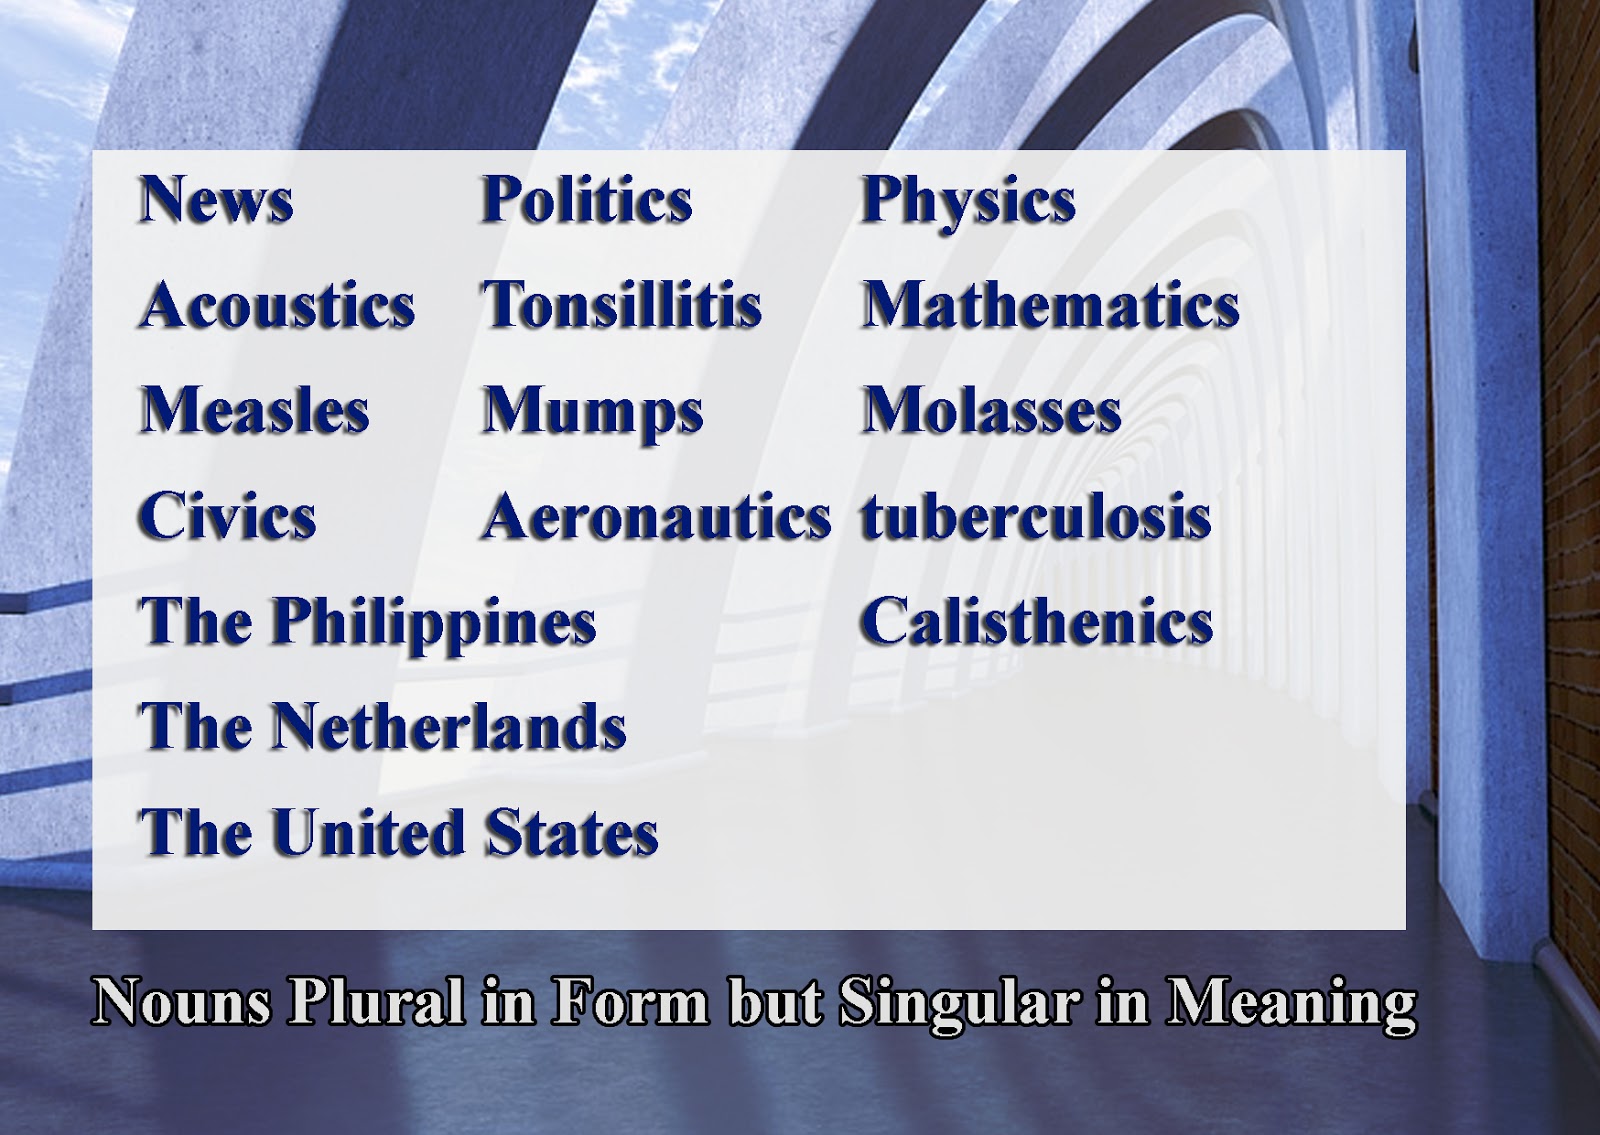 english-and-art-solutions-nouns-plural-in-form-but-singular-in-meaning